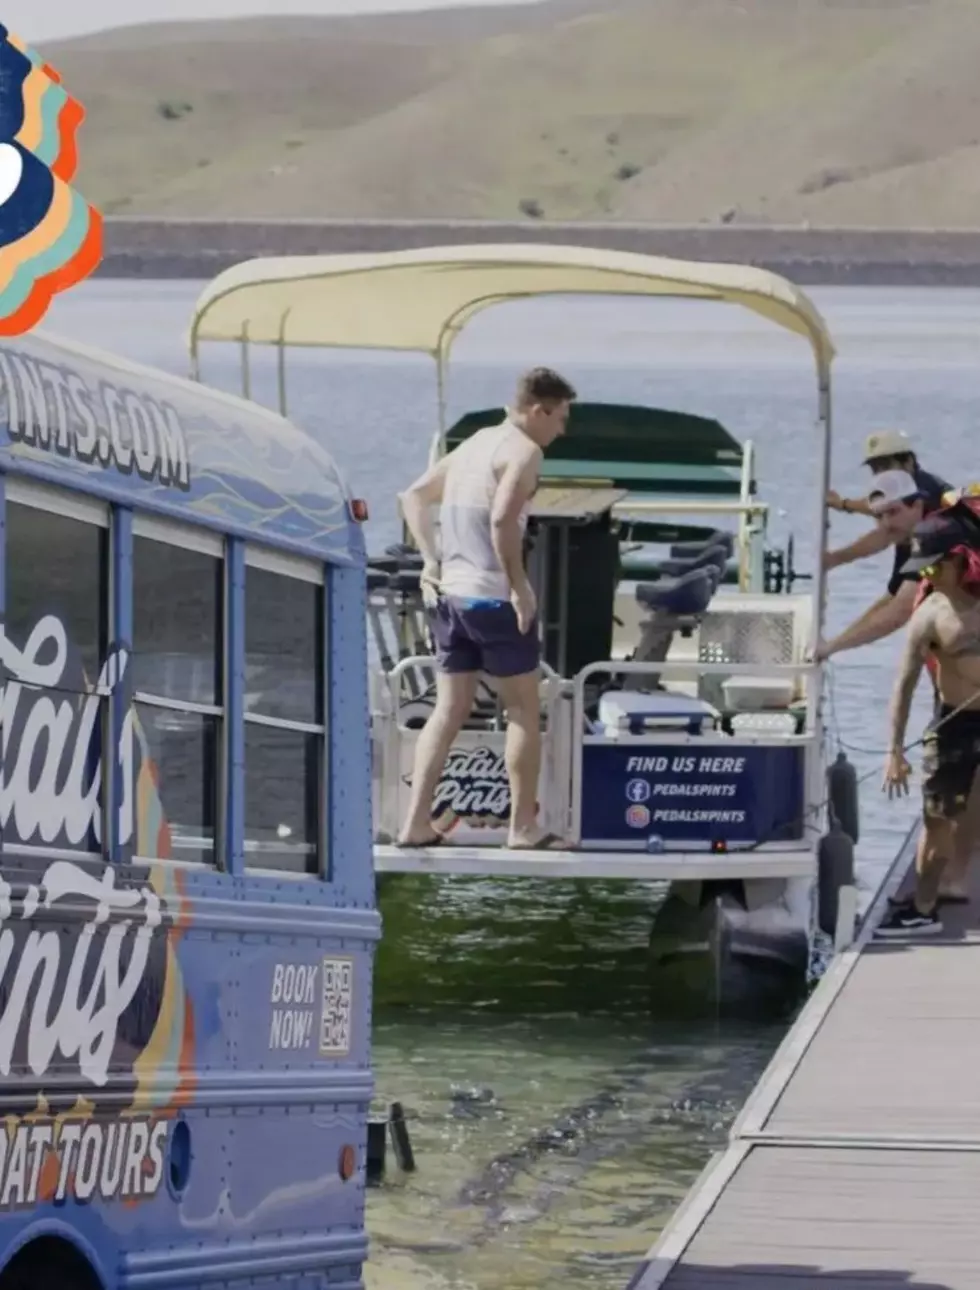 What’s Cooler Than Bike Bars in Boise? BOAT TOURS on Lucky Peak!